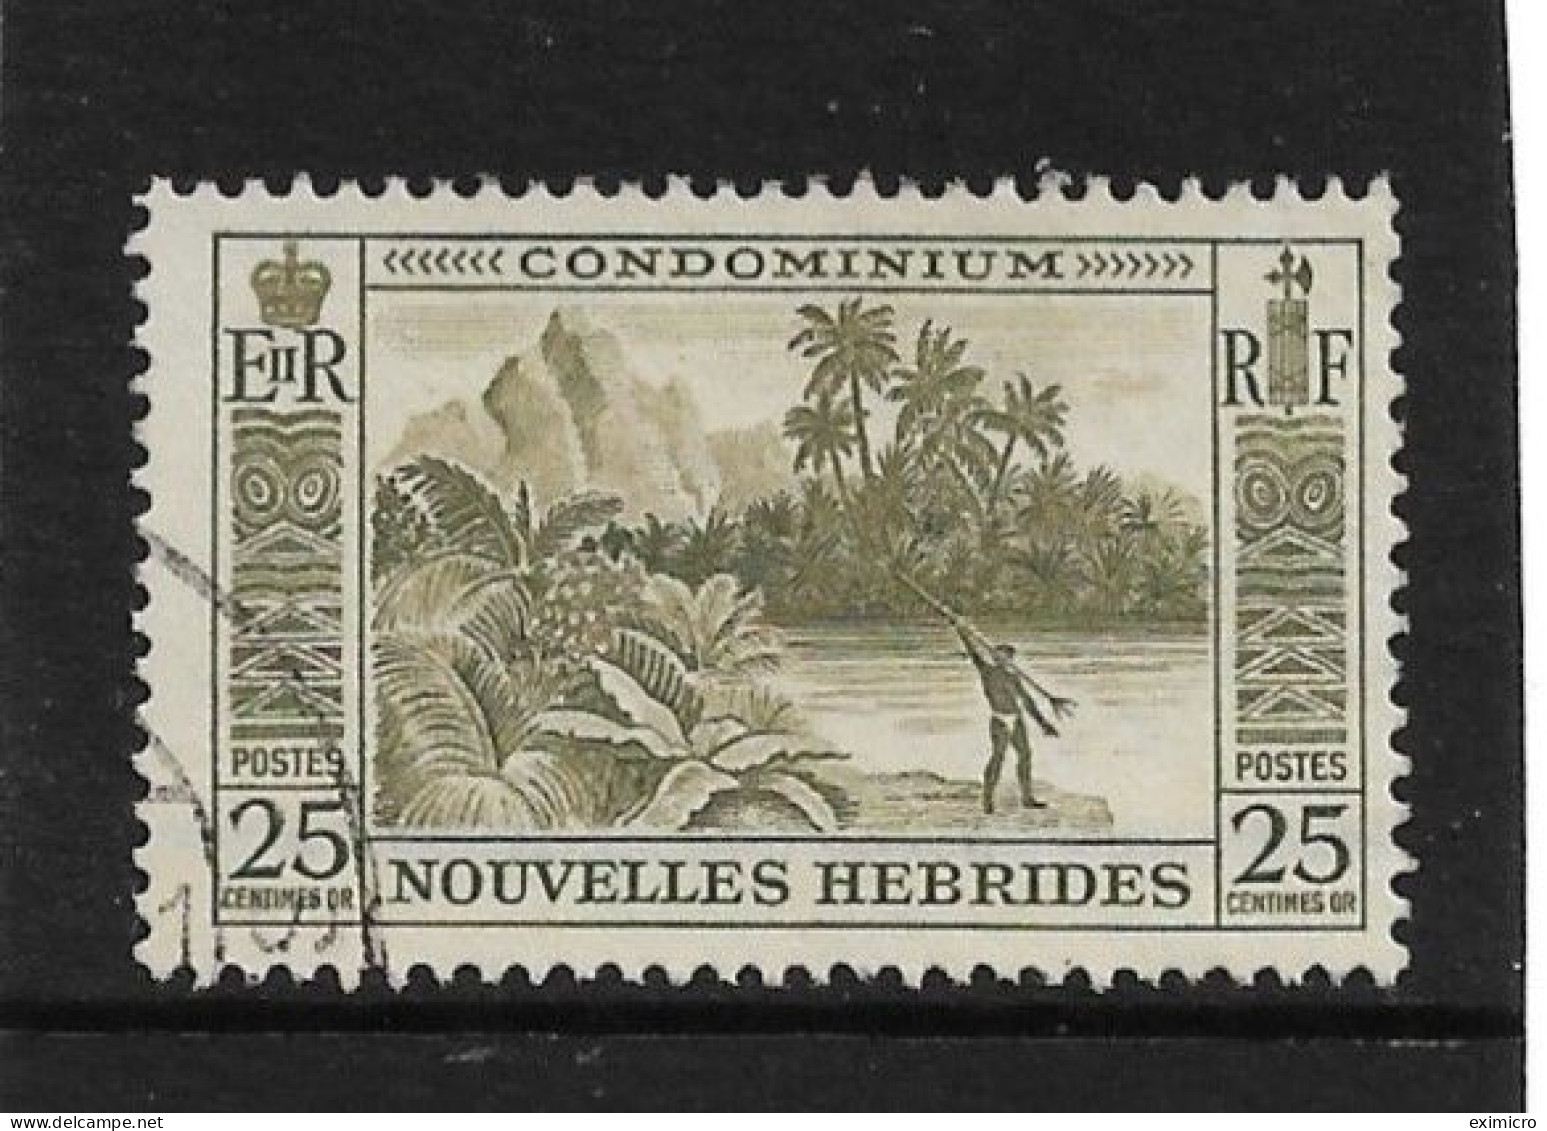 NEW HEBRIDES (FRENCH CURRENCY) 1957 25c SG F100 FINE USED - Used Stamps